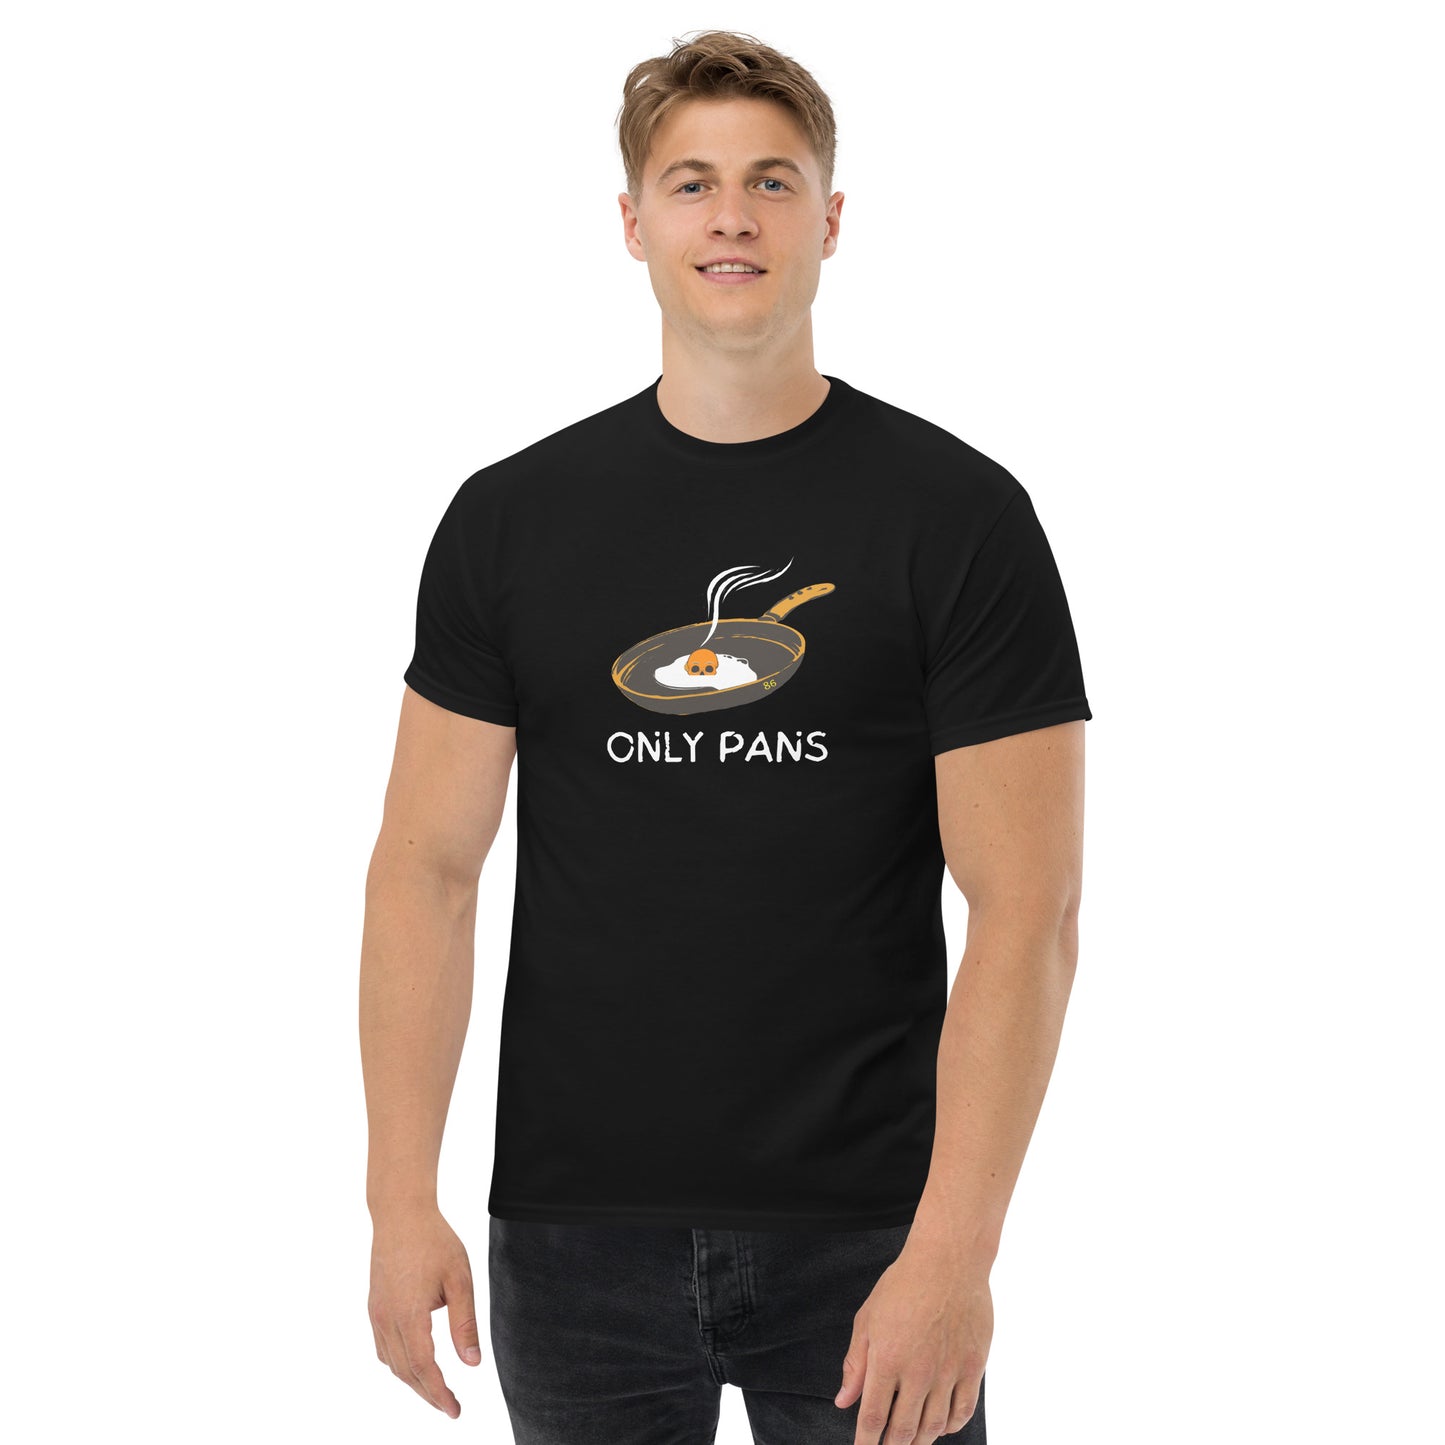 ONLY PANS Men's classic tee